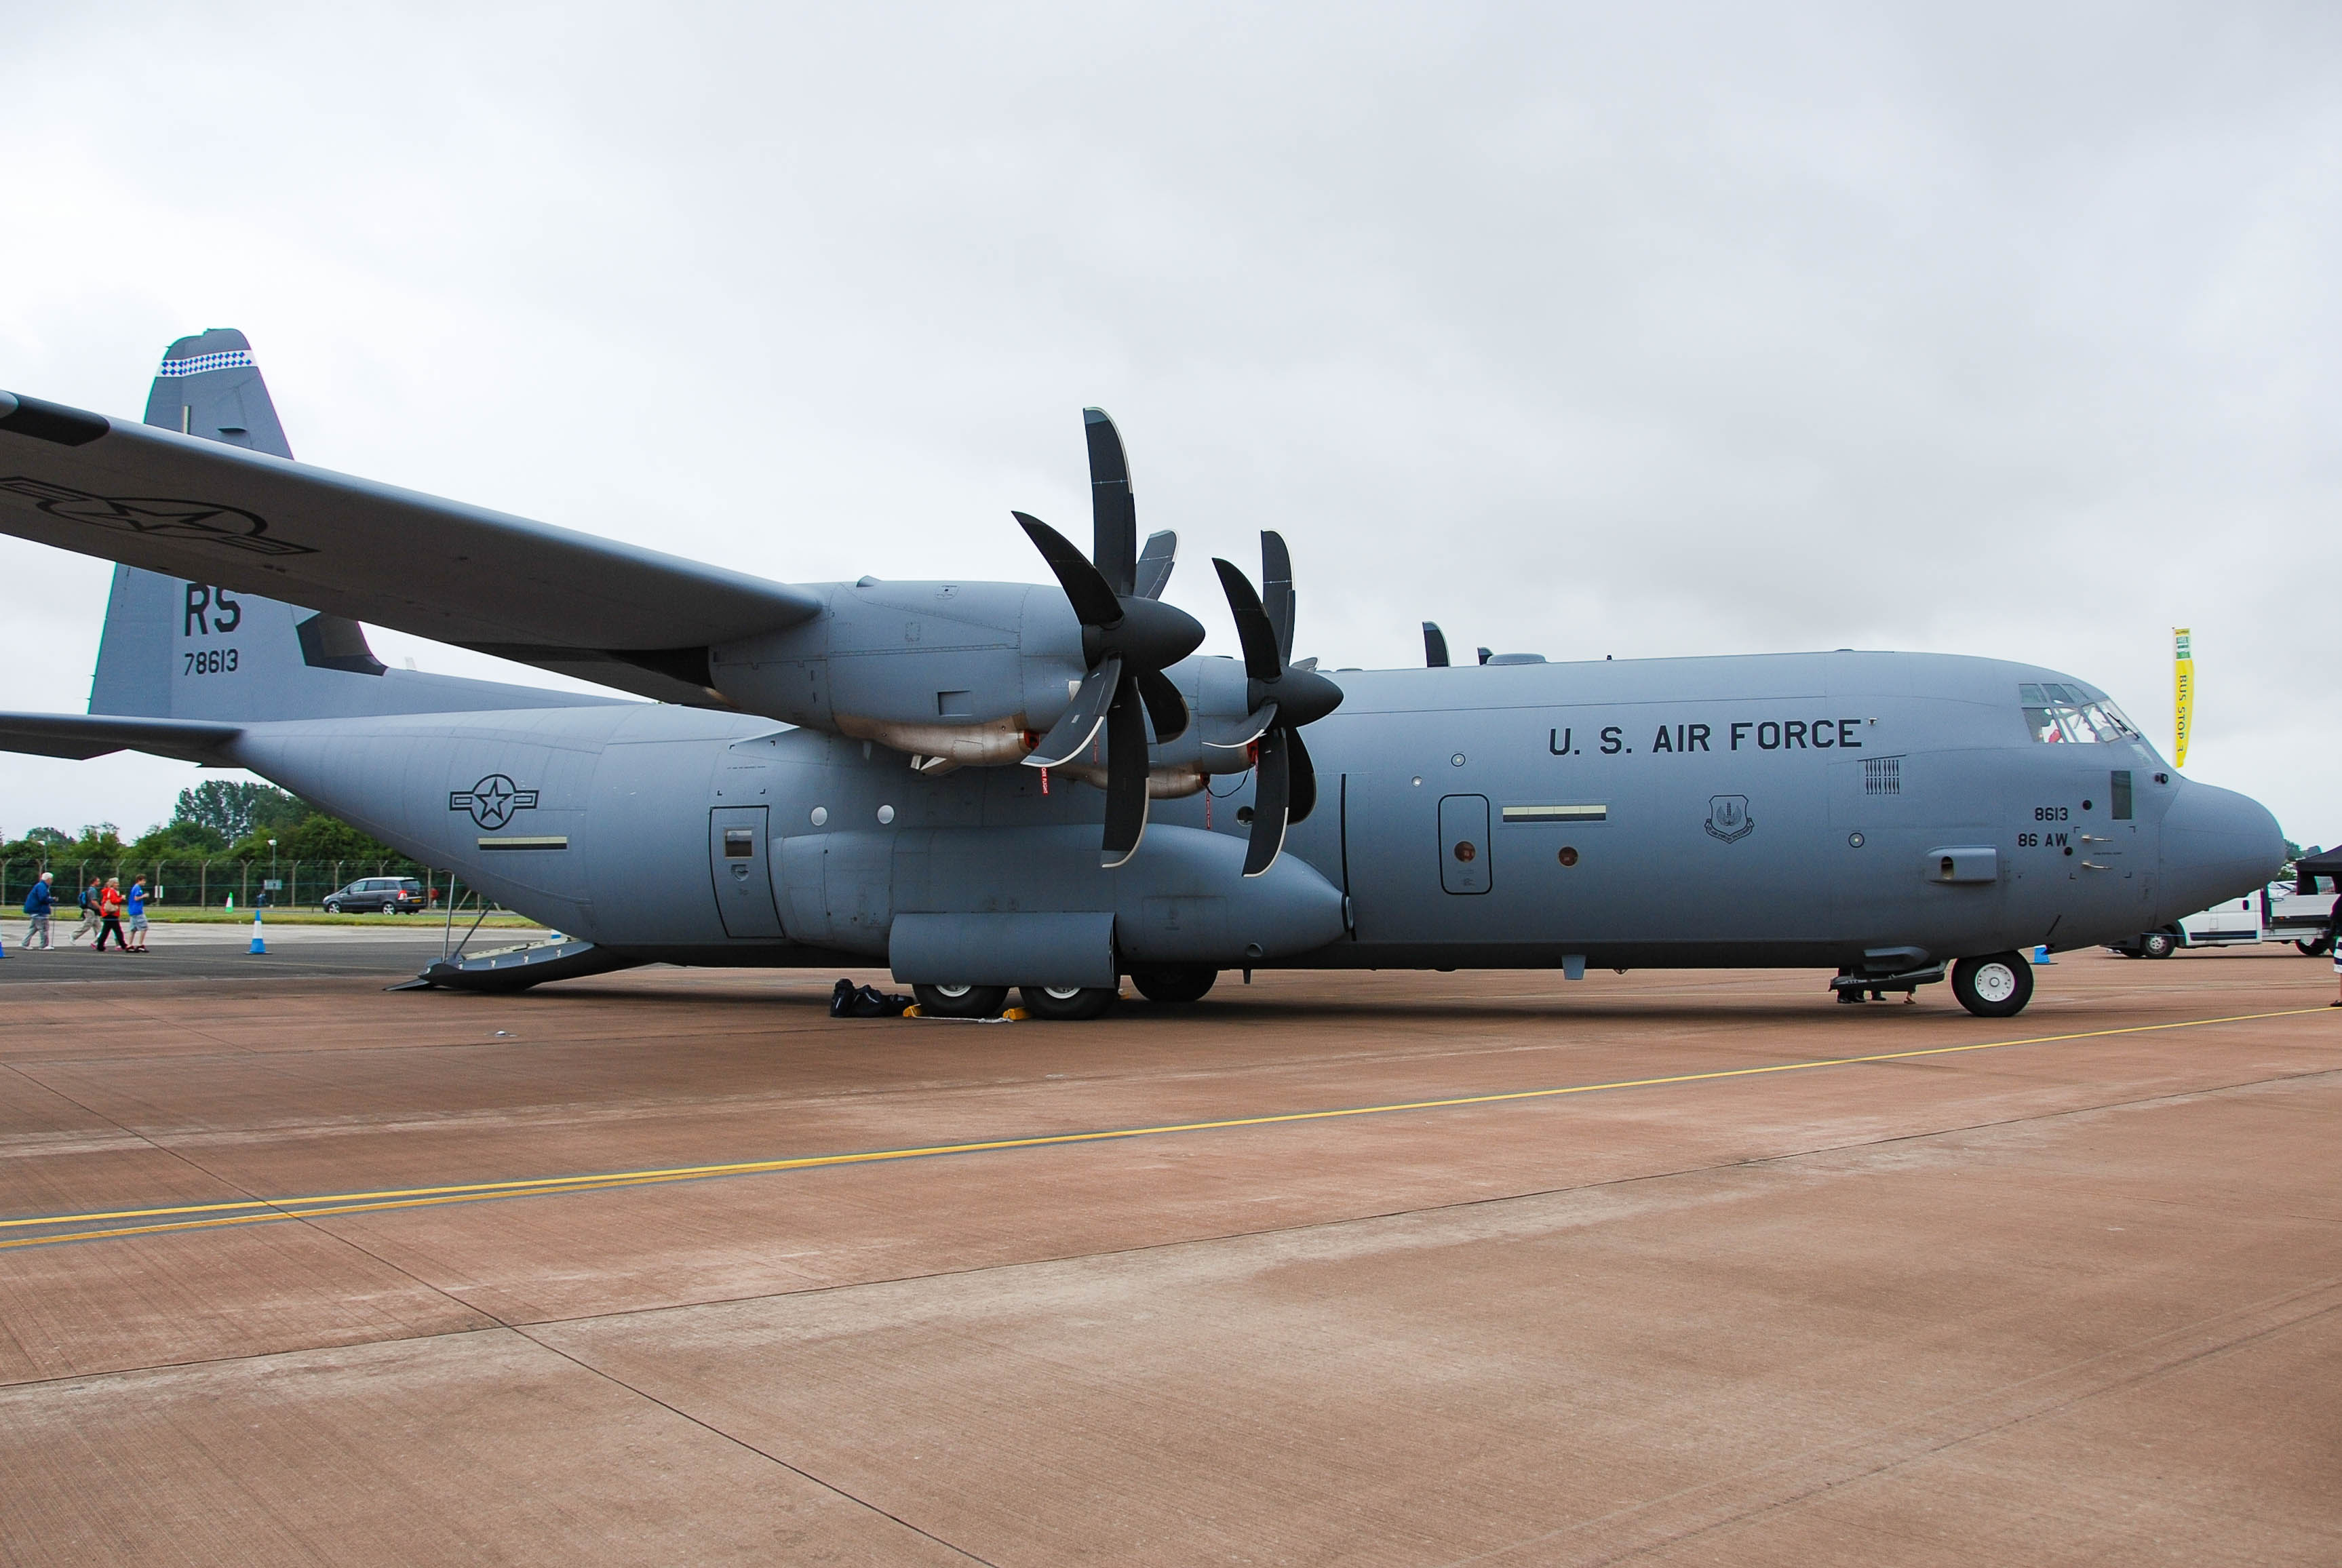 07-8613/078613 USAF - United States Air Force Lockheed C-130J-30 Hercules Photo by colinw - AVSpotters.com